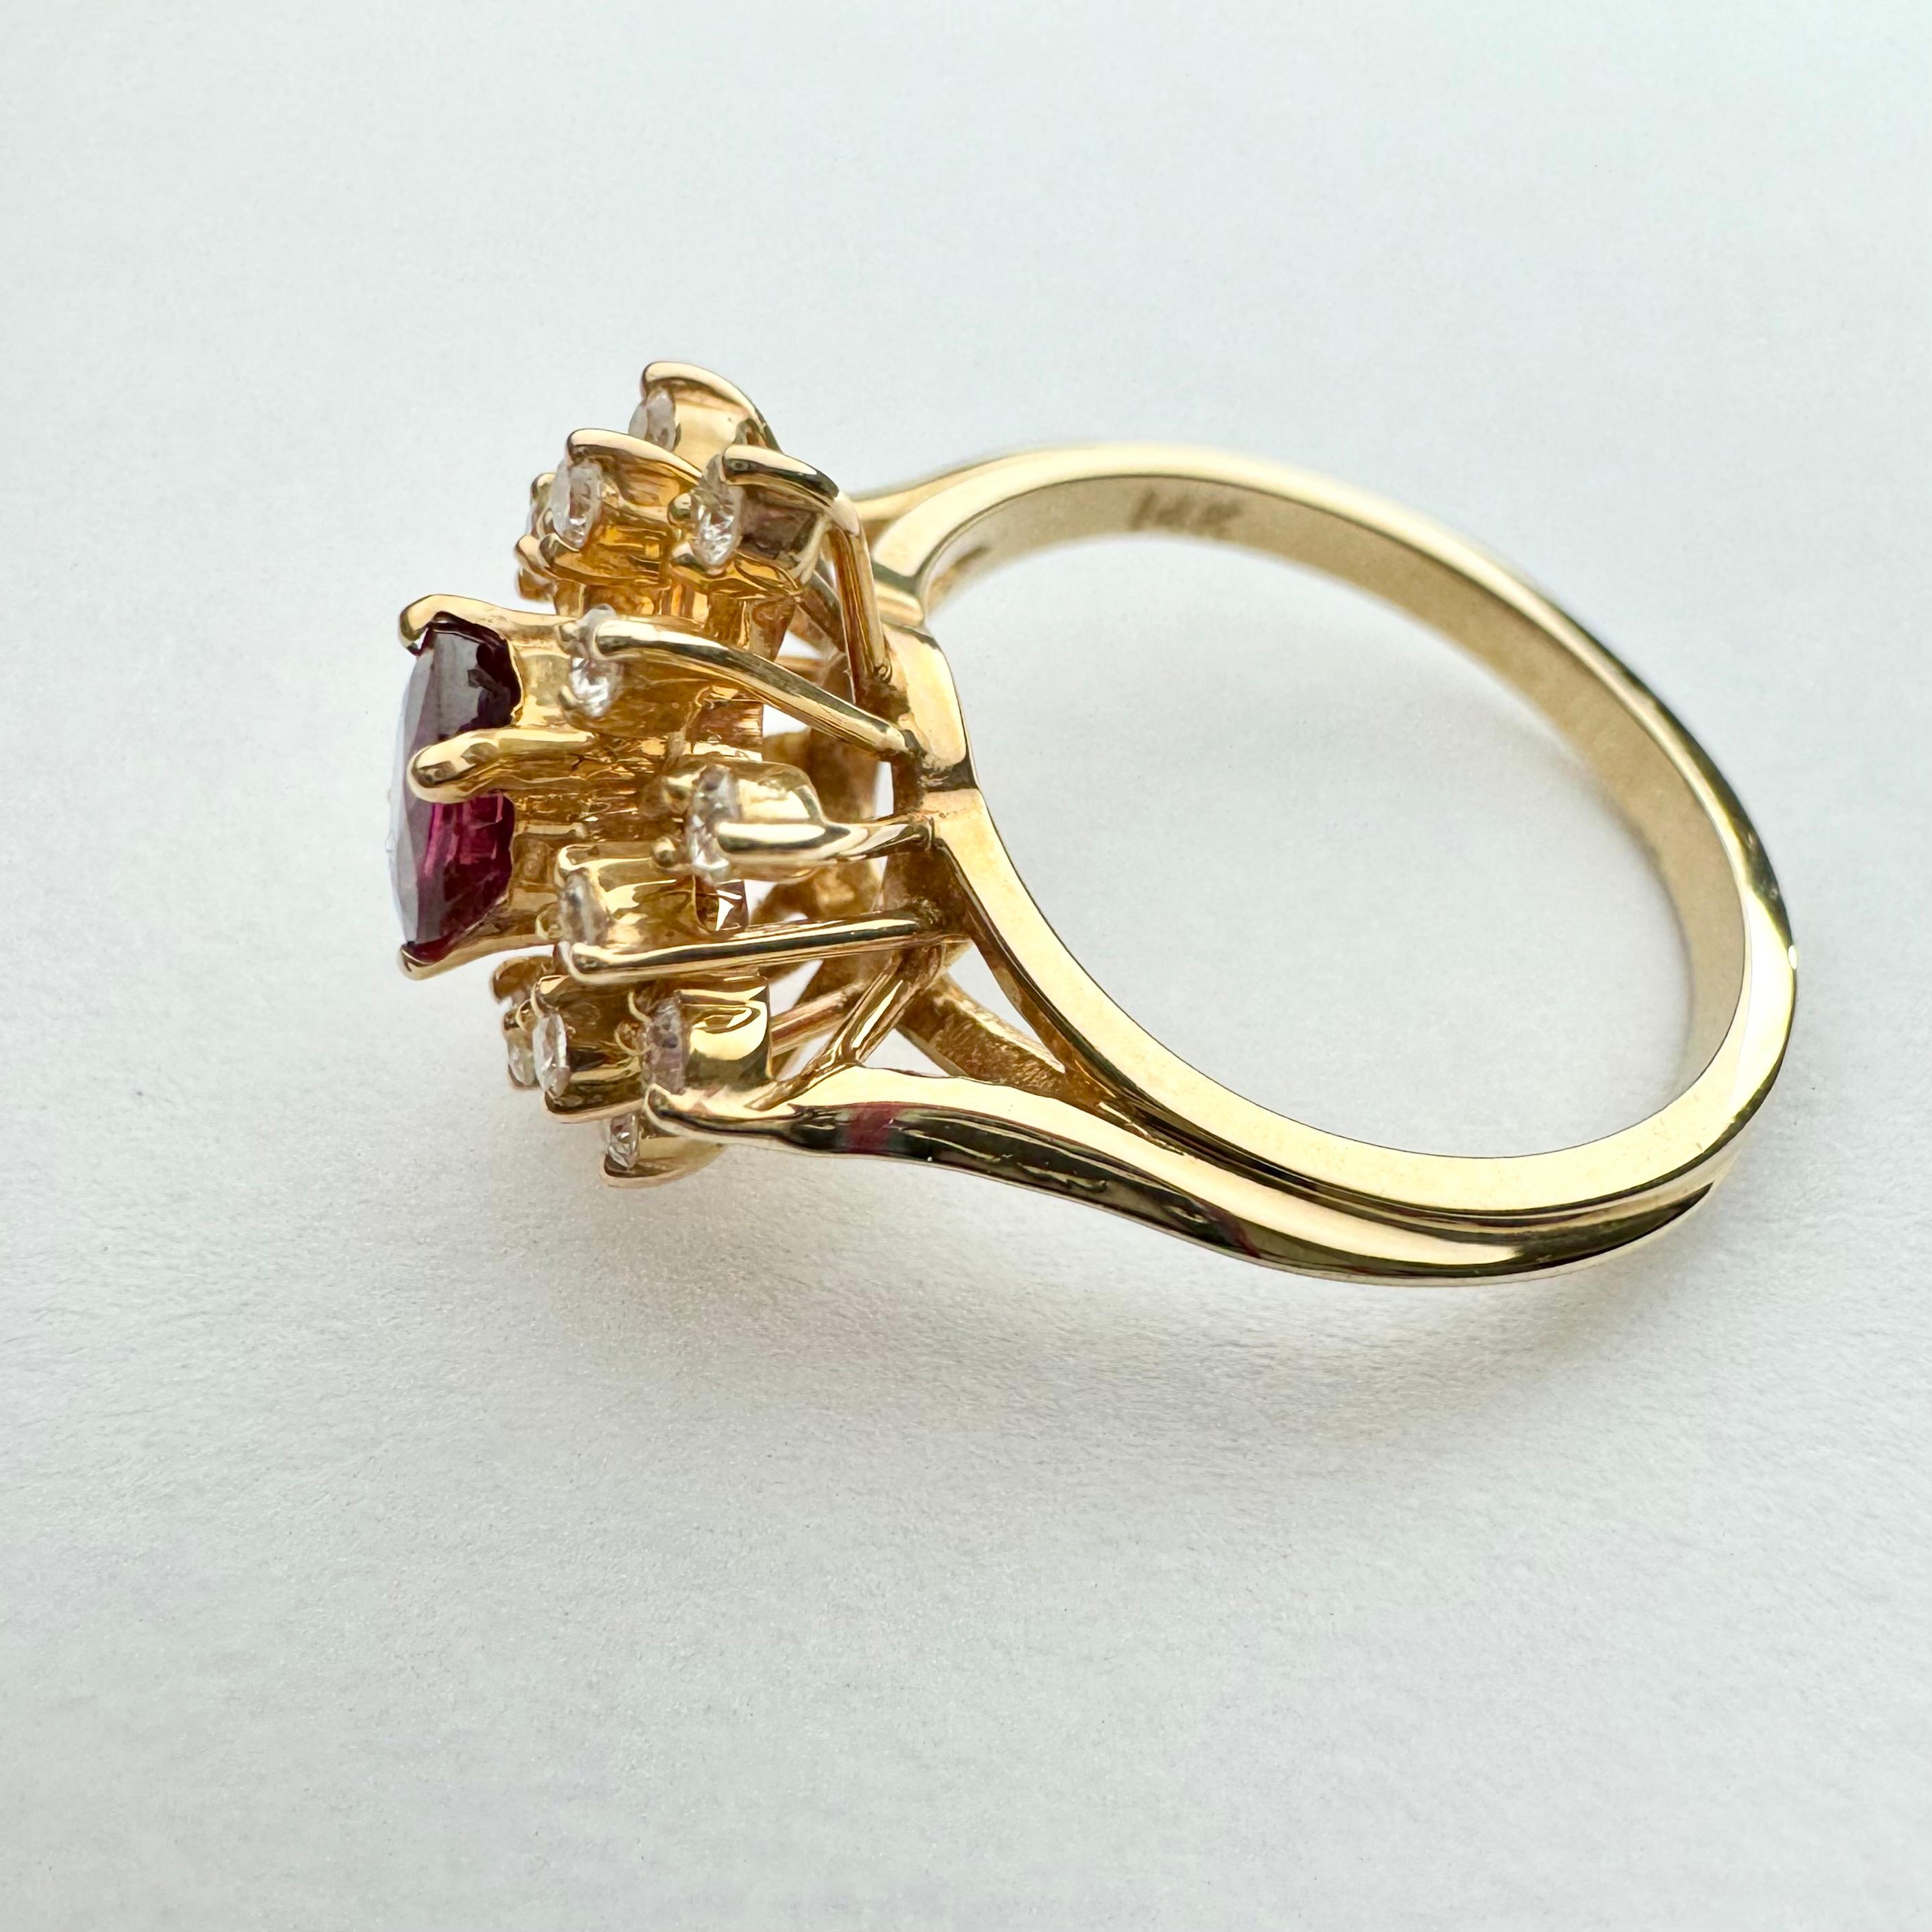 Gorgeous oval ruby and diamond ring in 14k yellow gold.
Gorgeous deep blue oval sapphire surrounded by dazzling  white round brilliant diamonds . Center oval sapphire is approximately 0.60carat and measures 5.5 x 4.5mm
Total diamond weight is